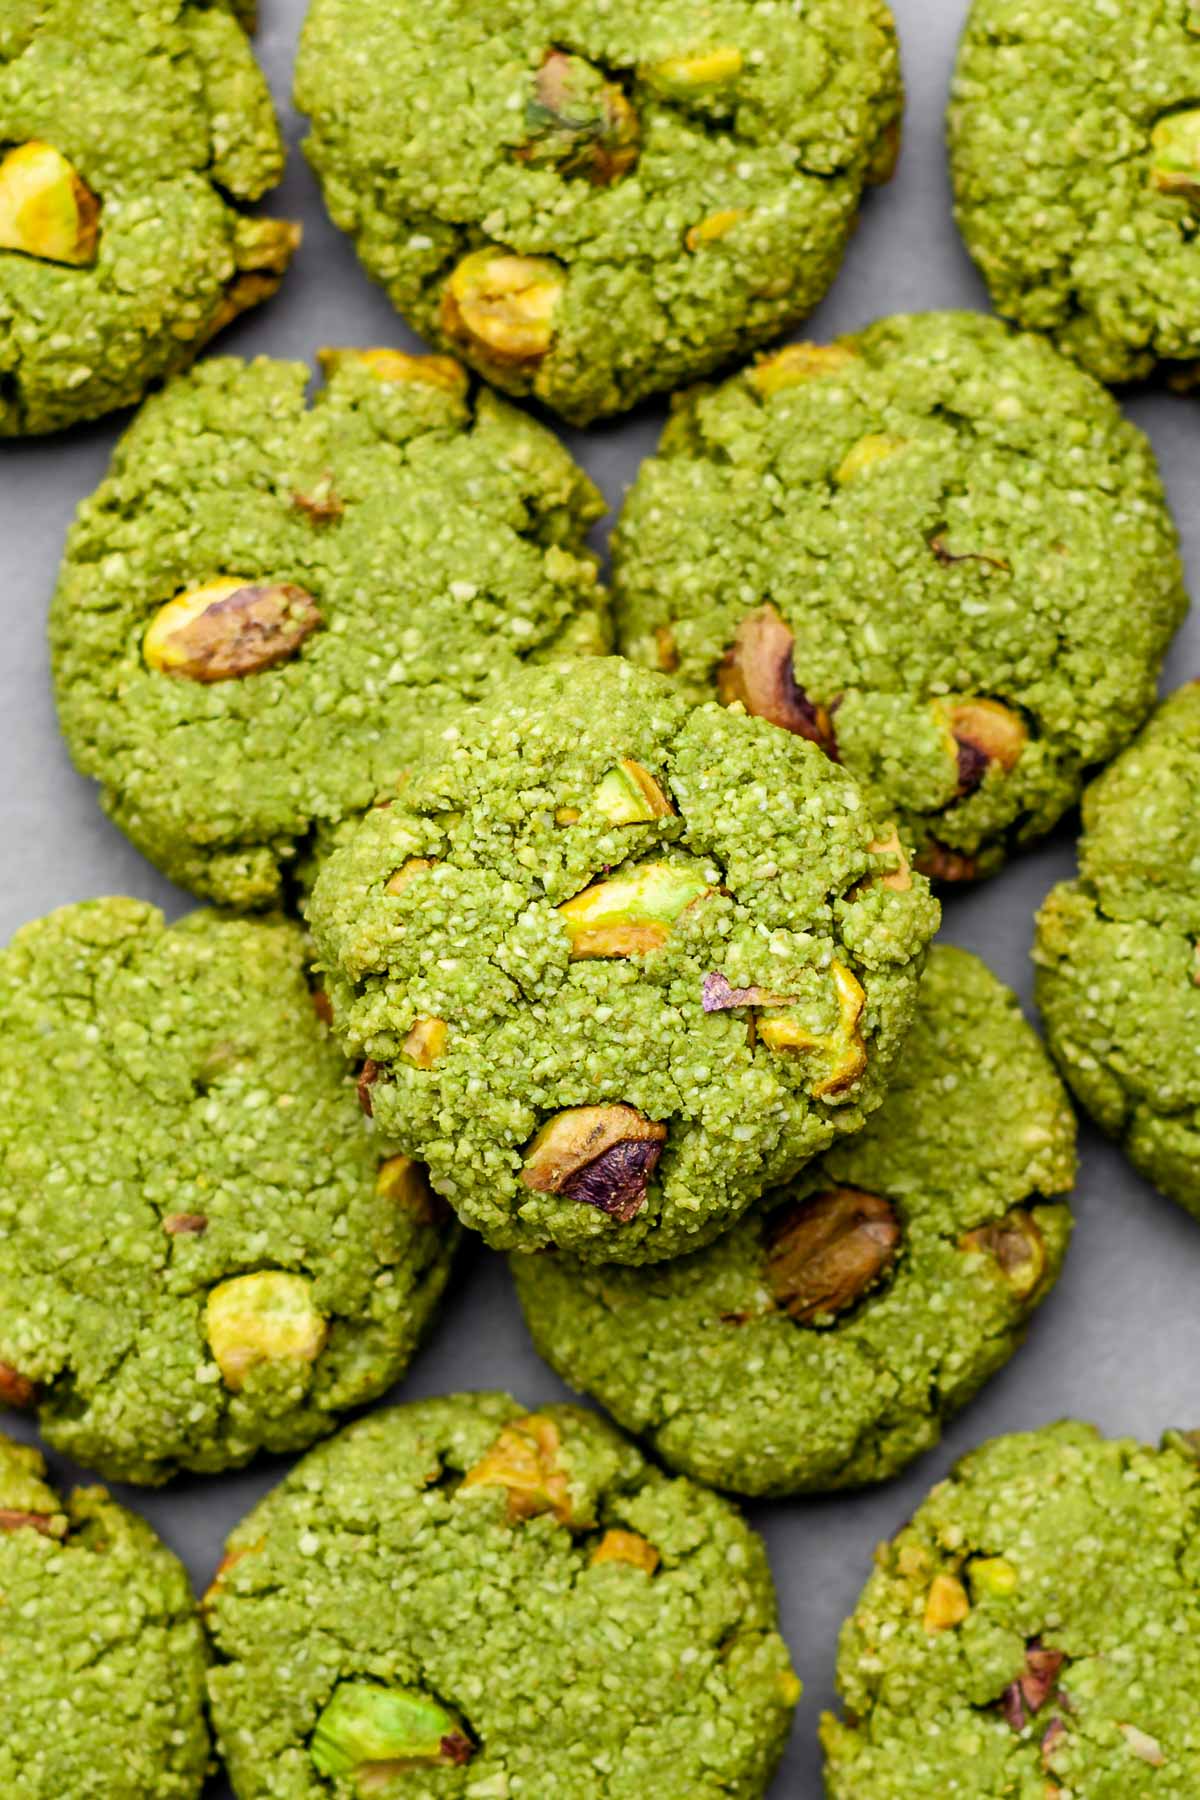 Overhead view of a pile of vegan matcha cookies on a concrete background.